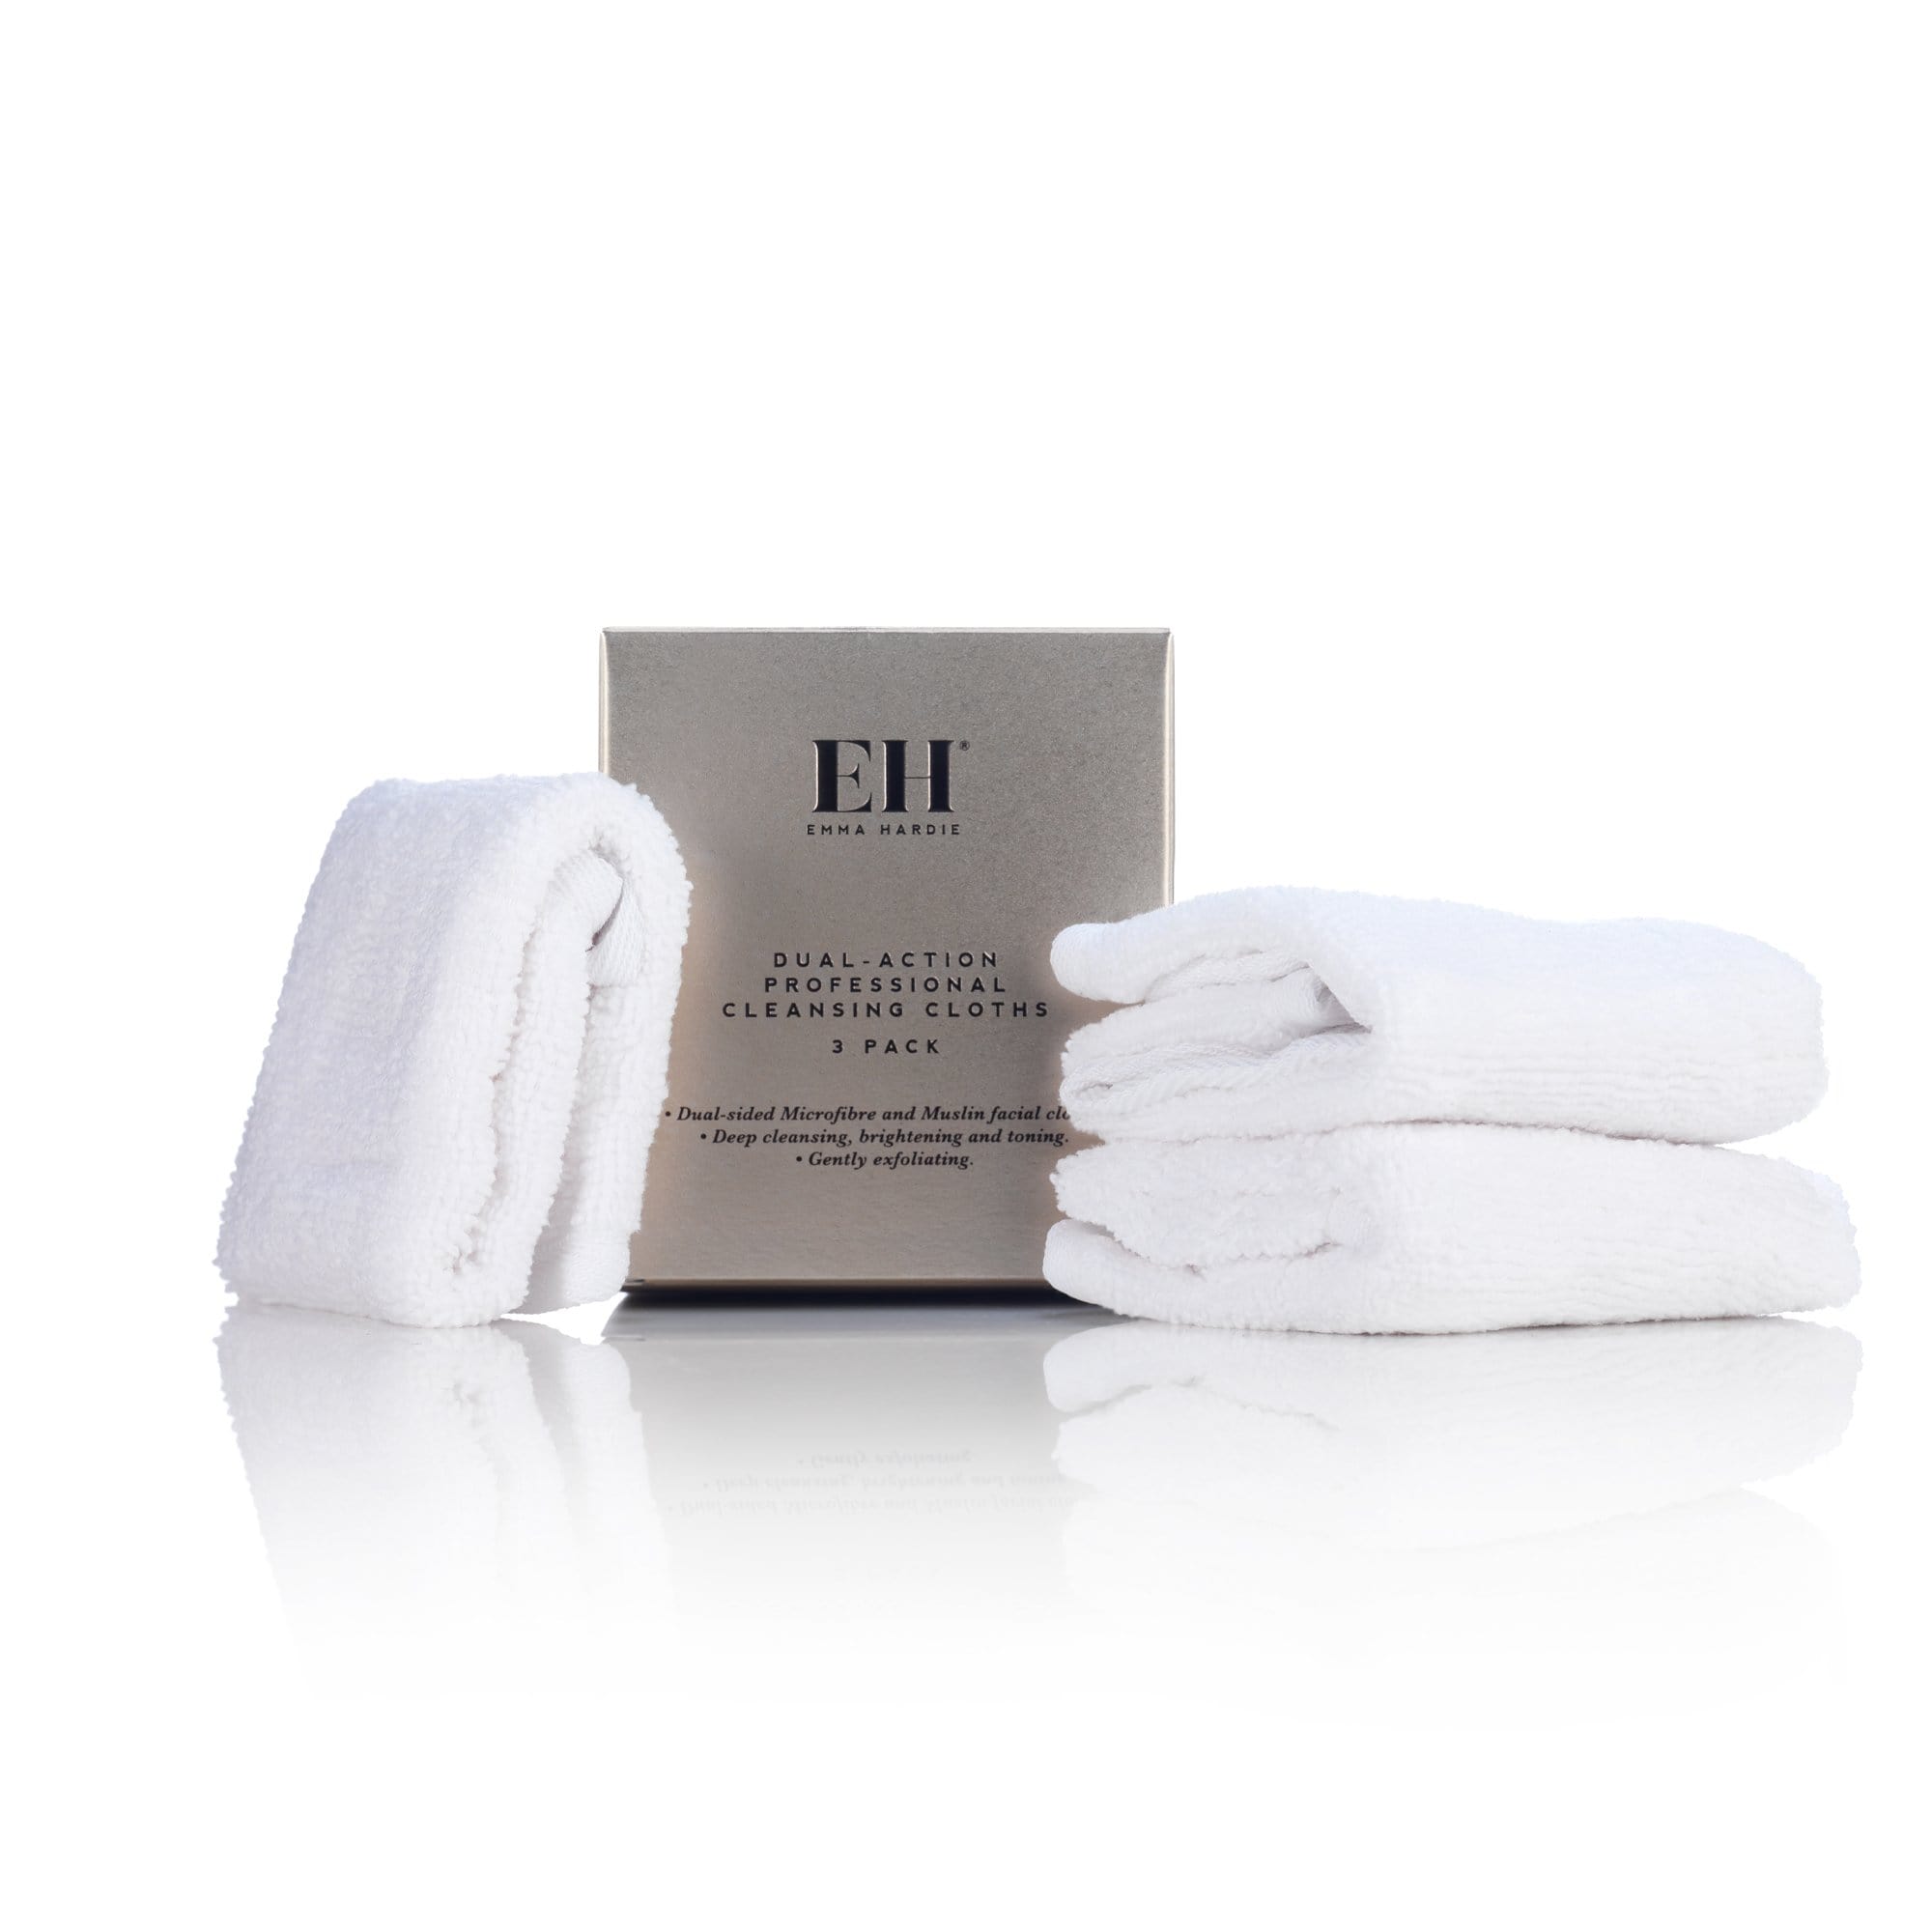 Dual Action Professional Cleansing Cloths Emma Hardie Cleansing Cloths